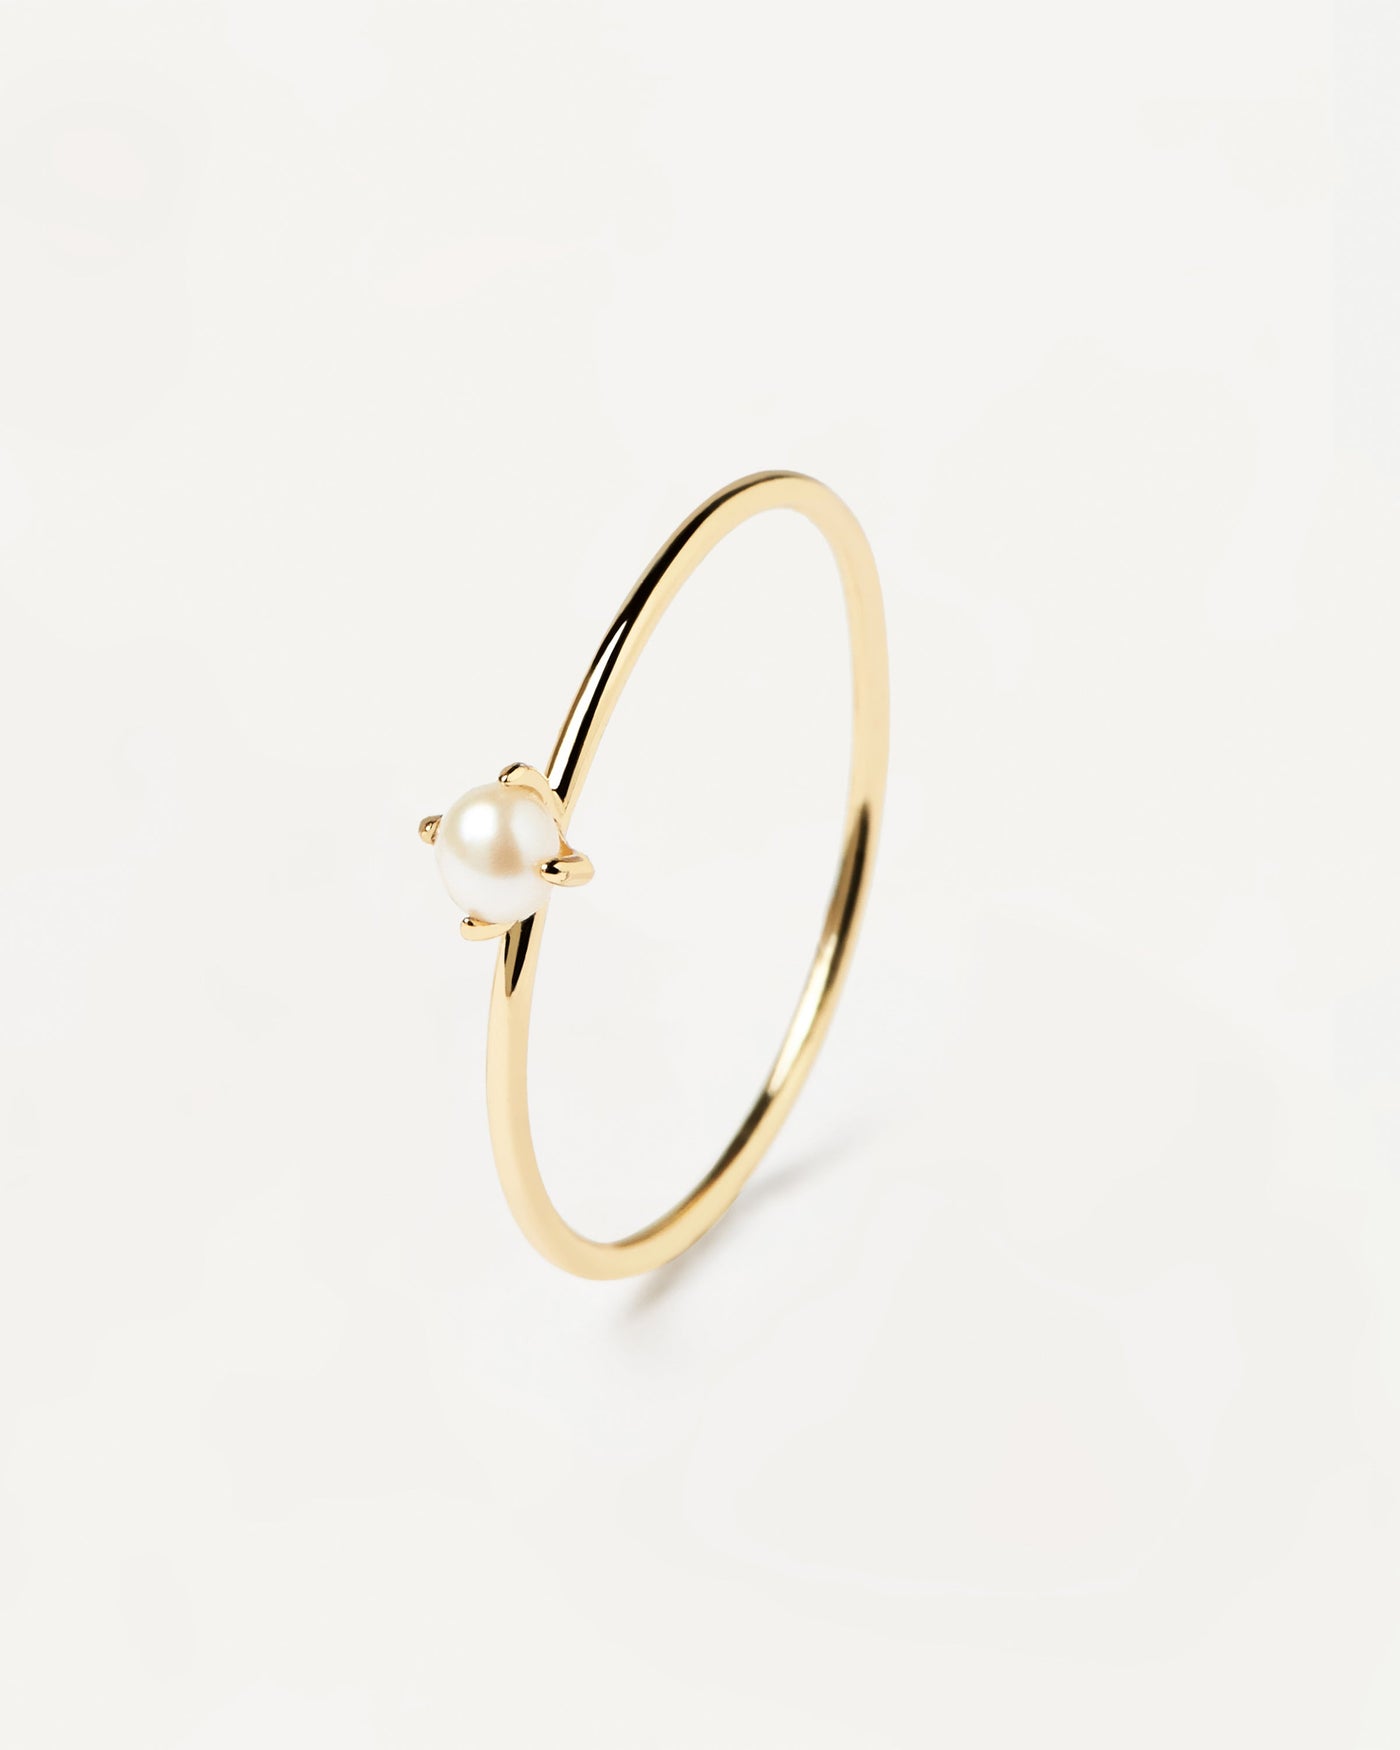 2023 Selection | Solitary Pearl Ring. Natural pearl set on a thin 18k gold plated 925 silver ring. Get the latest arrival from PDPAOLA. Place your order safely and get this Best Seller. Free Shipping.